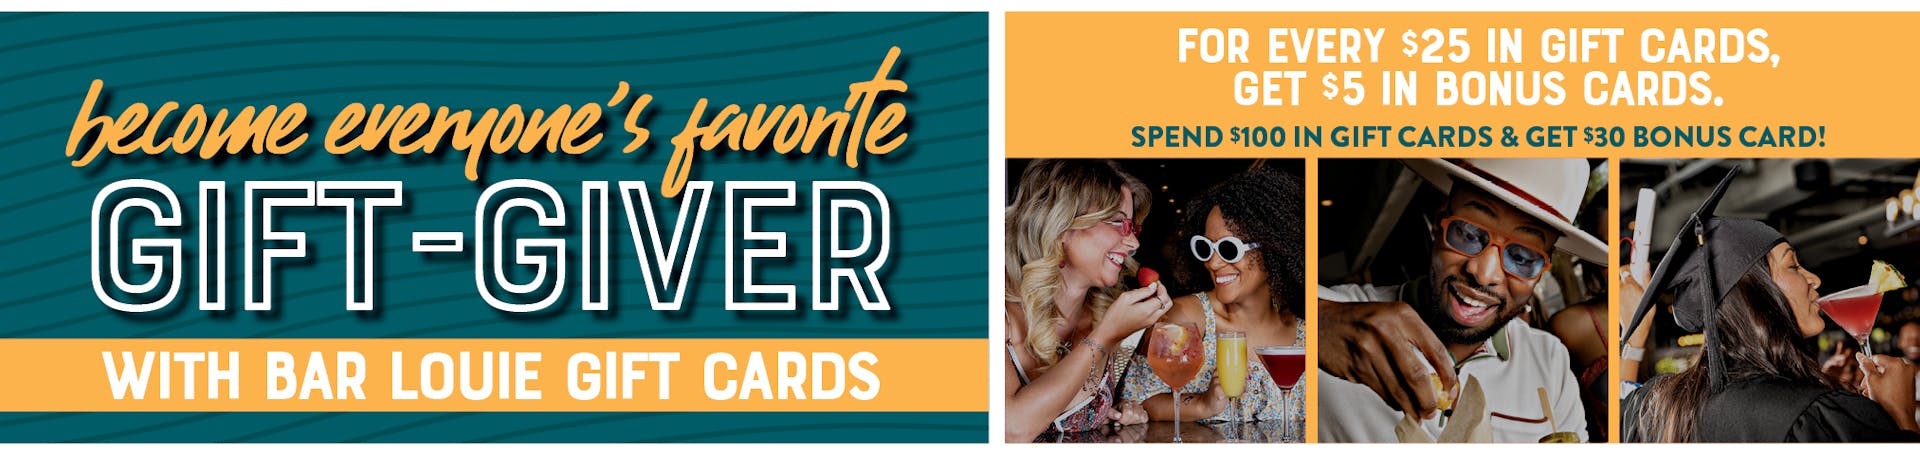 Image of several people enjoying cocktails and food. Become everyone's favorite gift-giver with Bar Louie gift Cards. For every $25 in gif cards, get $5 bonus cards. Spend $100 in gift cards & get a $30 bonus!